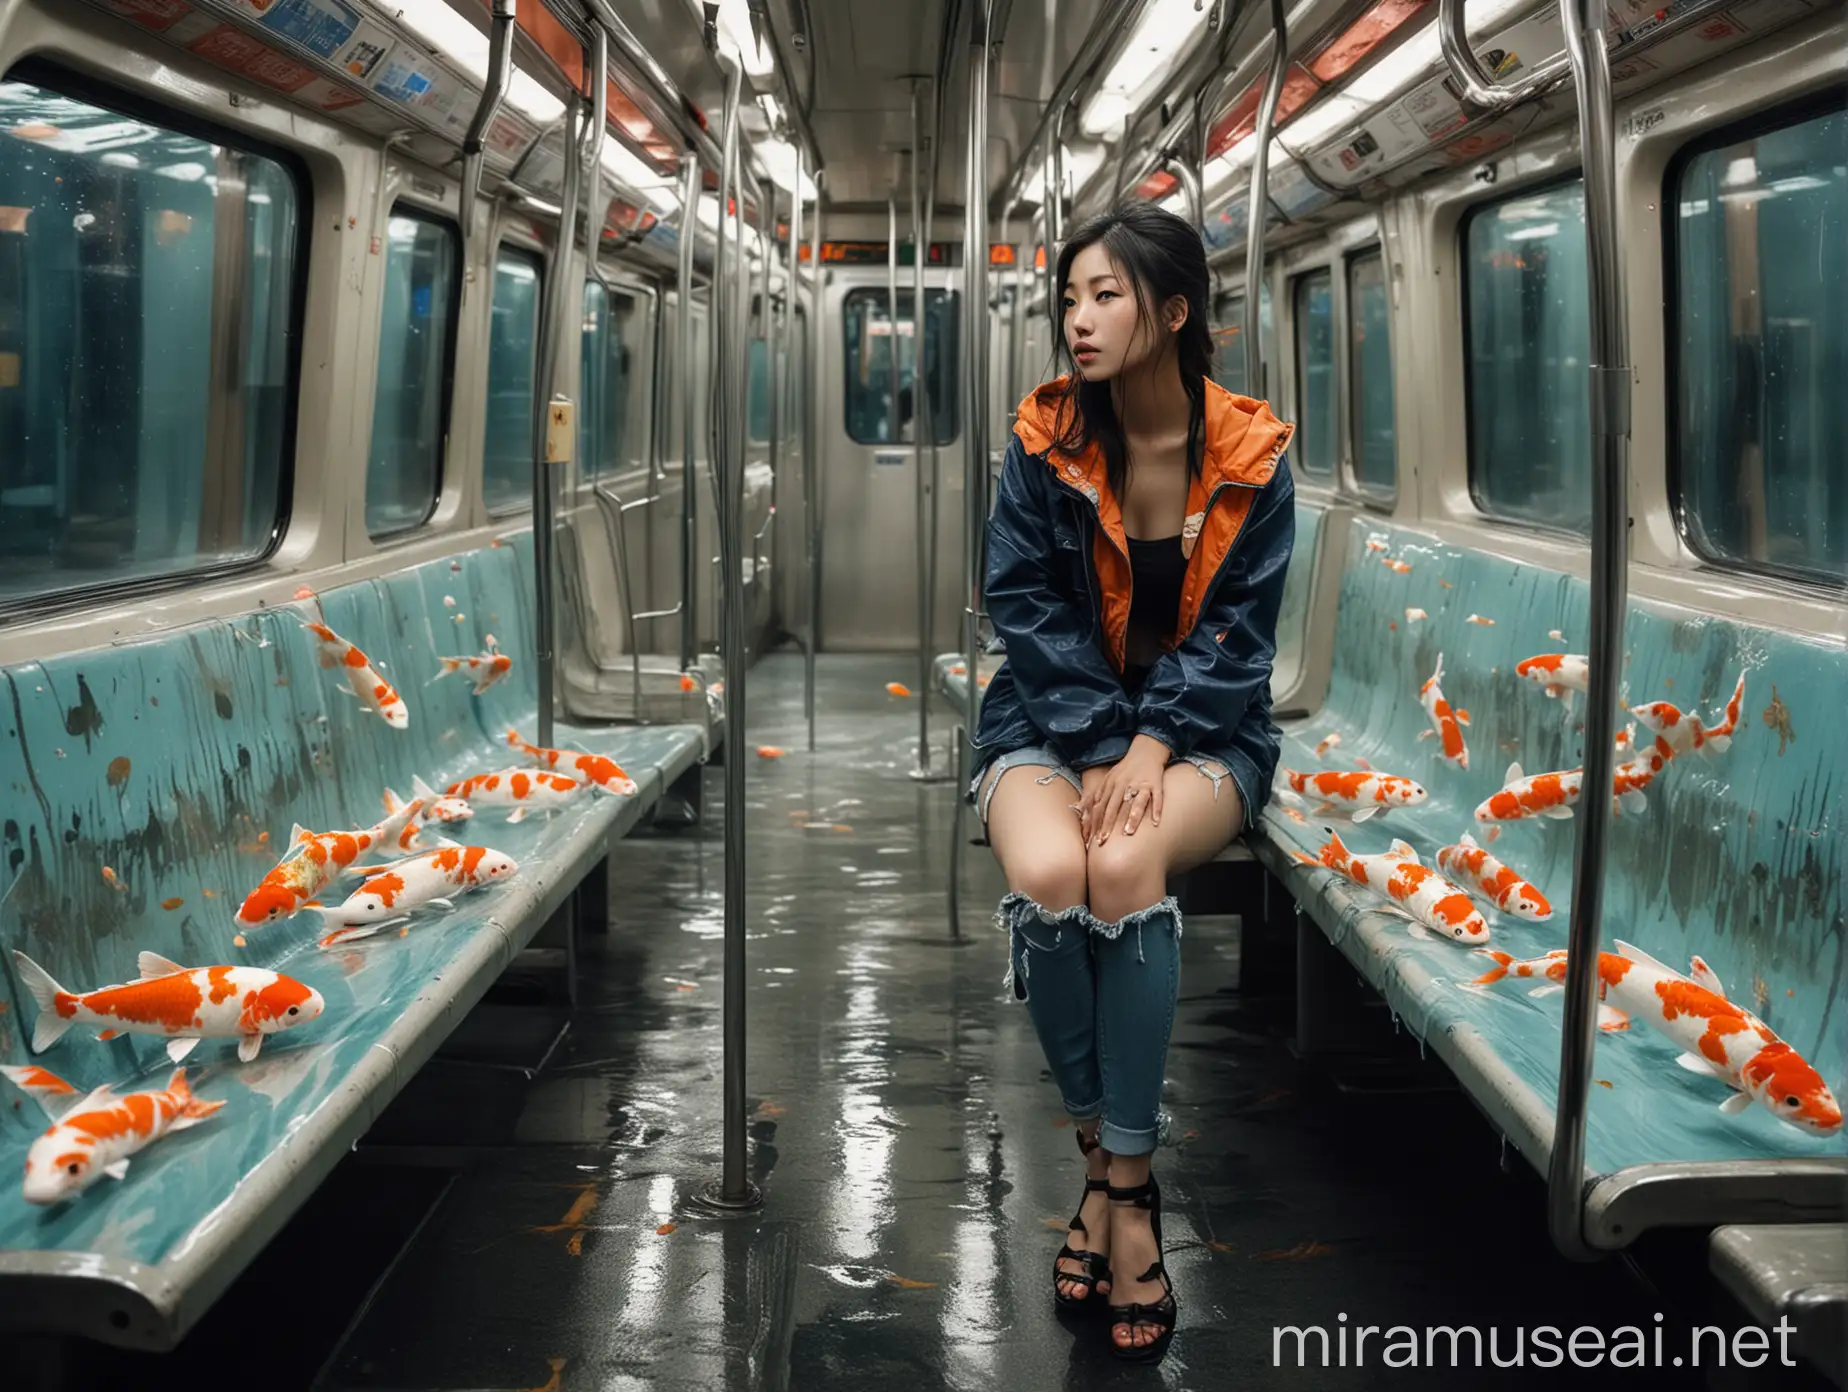 A metro train in Hongkong, slightly filled with water and adorned with graceful koi fish swimming. a beautiful Korean woman wearing a jacket and ripped jeans stand on the benches, cautious and afraid of getting wet, as this surreal fusion of urban transport and underwater beauty creates an unexpected and intriguing scene. The contrast between the hesitant passengers and the serene aquatic environment adds a whimsical touch to this imaginative scenario